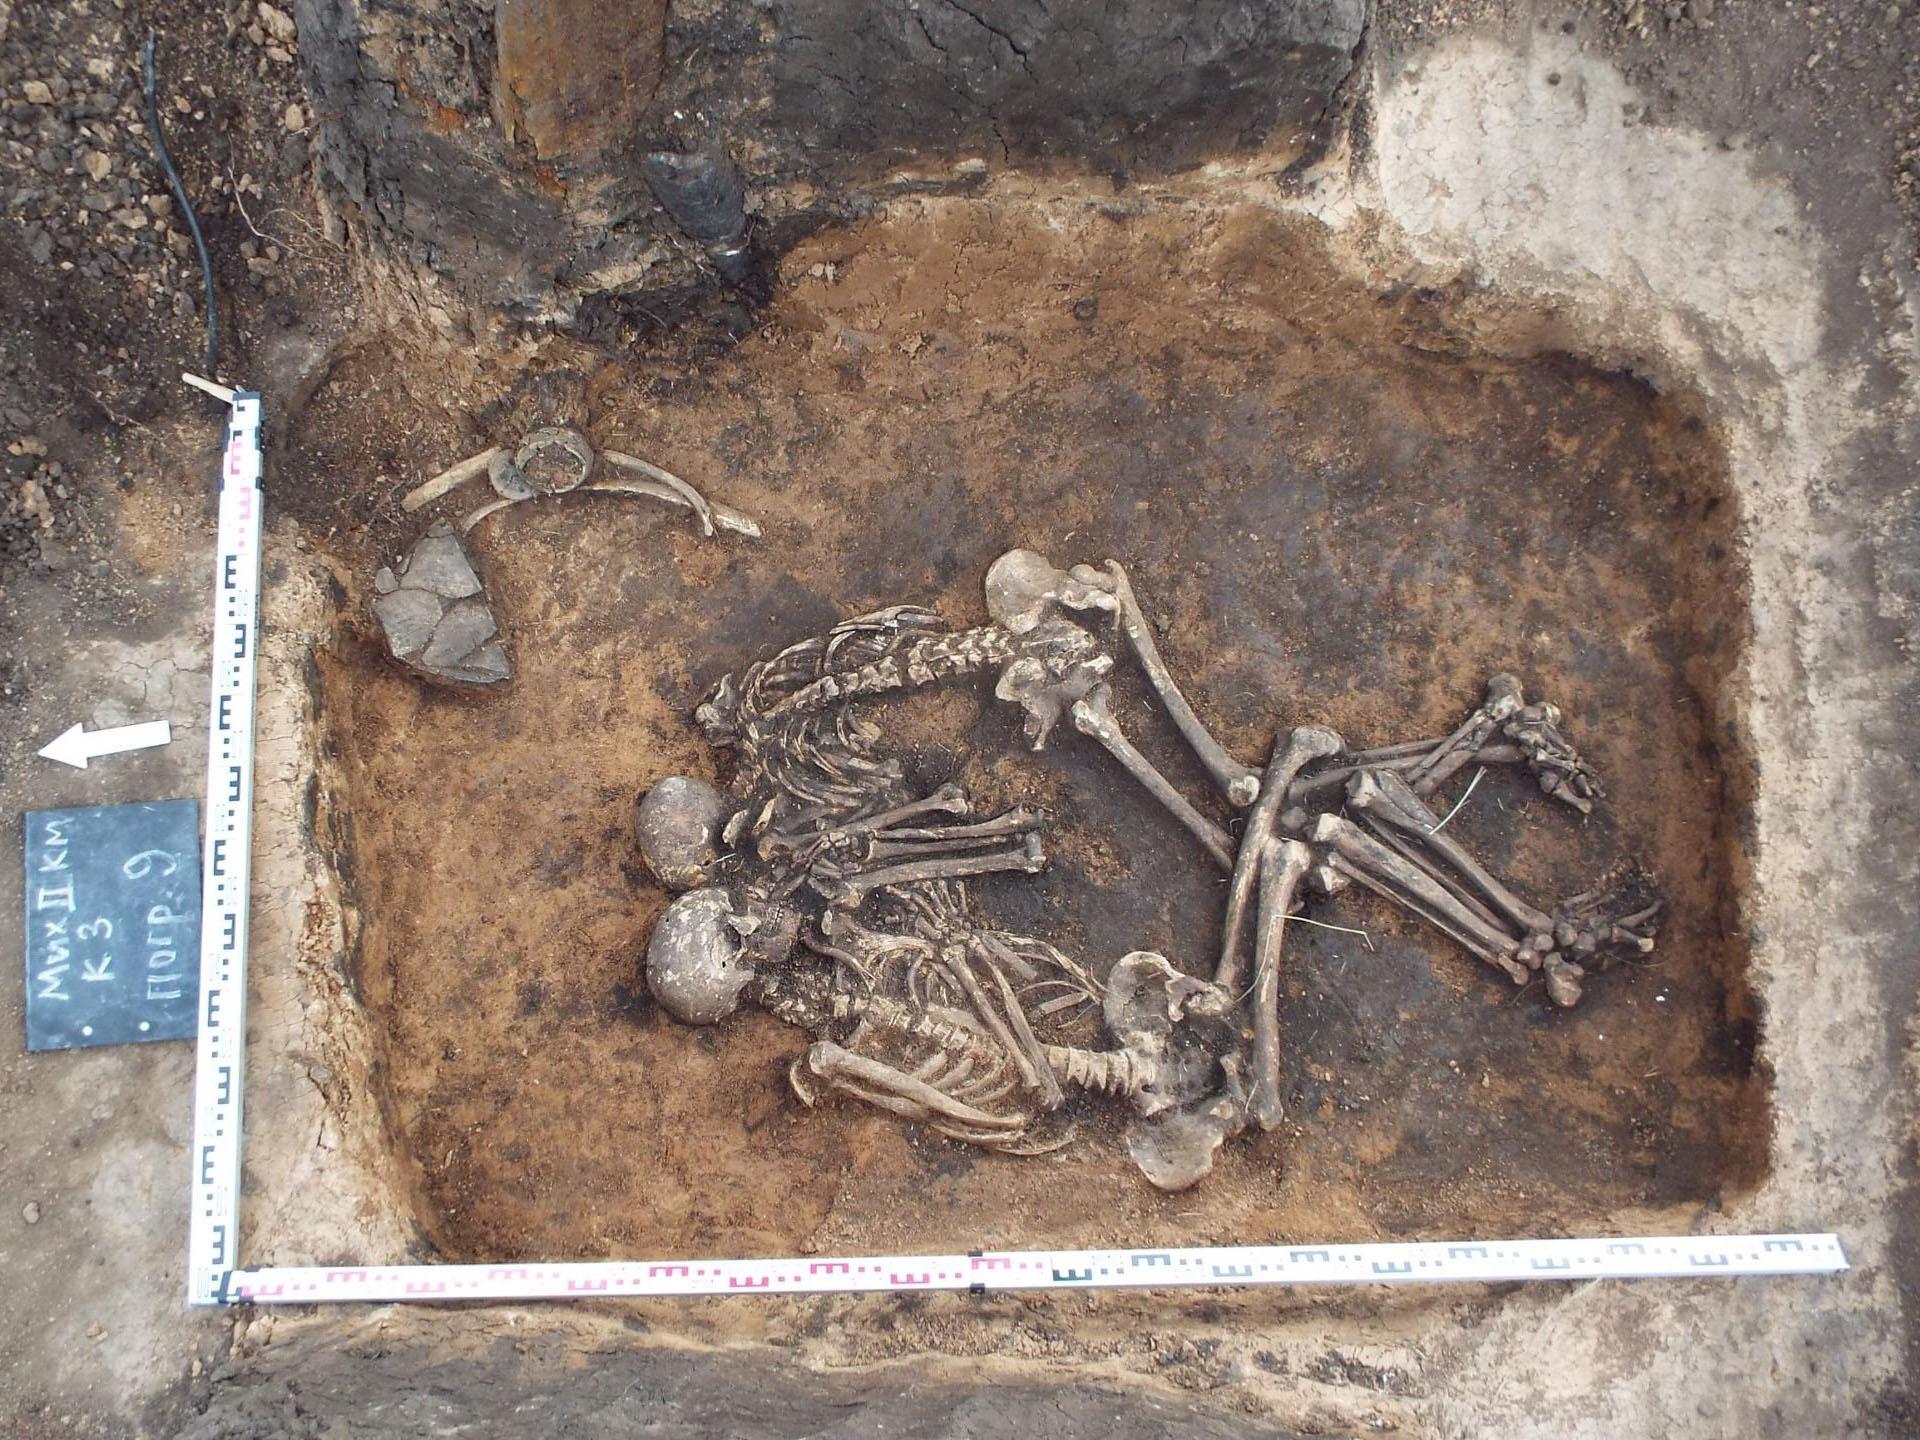 Skeletons from a double grave in the Samara region contained DNA evidence of an early form of bubonic plague